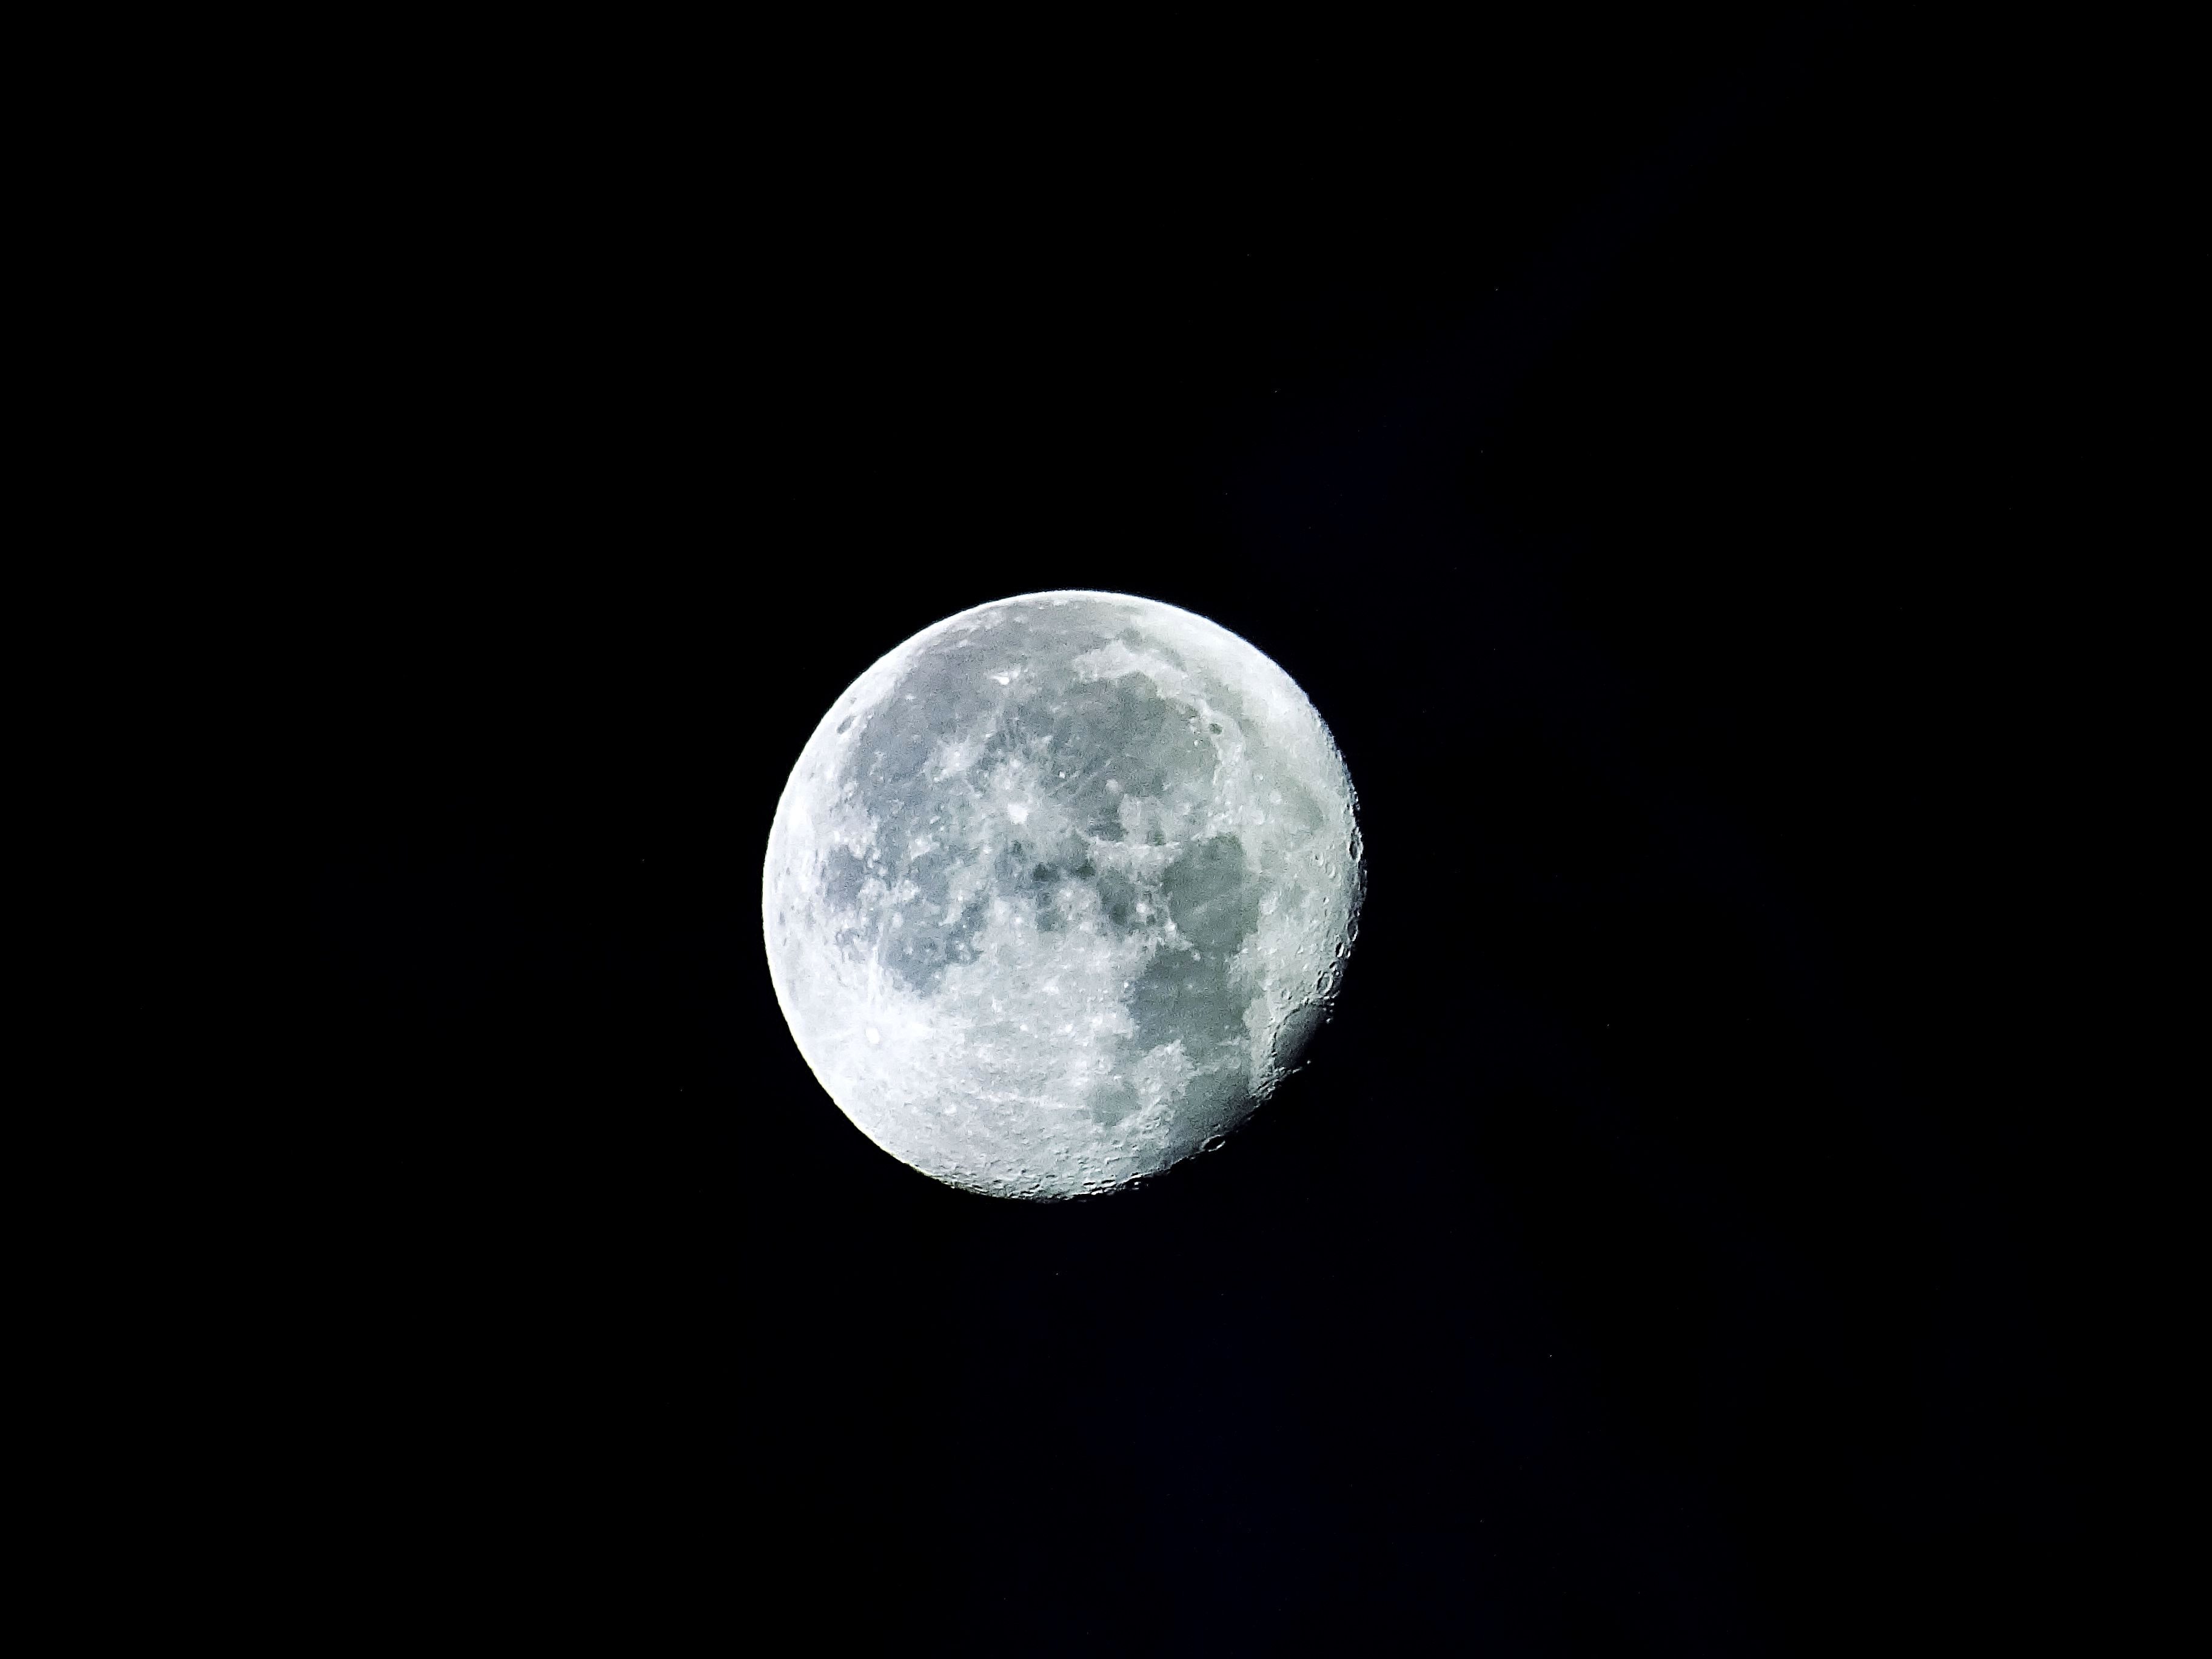 Moon Photography, Astrology, Astronomy, Ball-shaped, Crater, HQ Photo